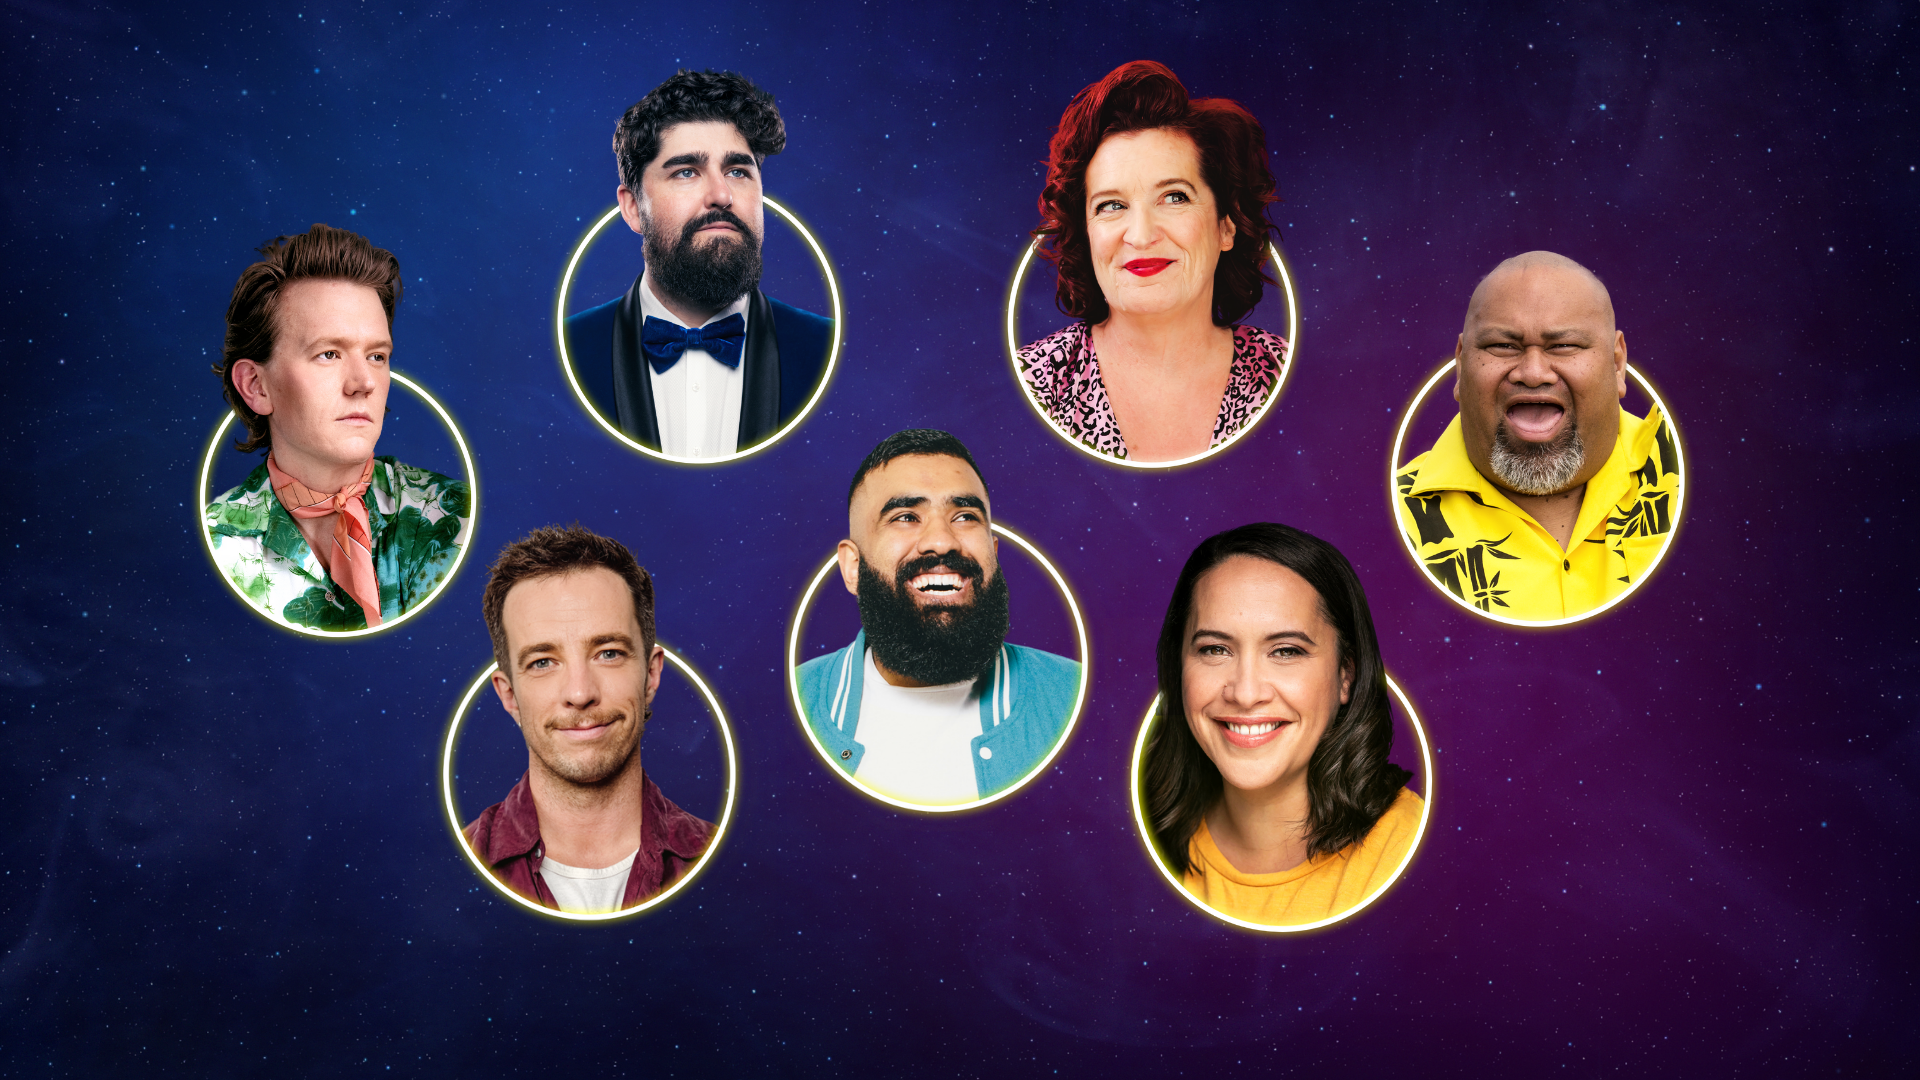 More comedians announced for the 2022 Best Foods Comedy Gala!